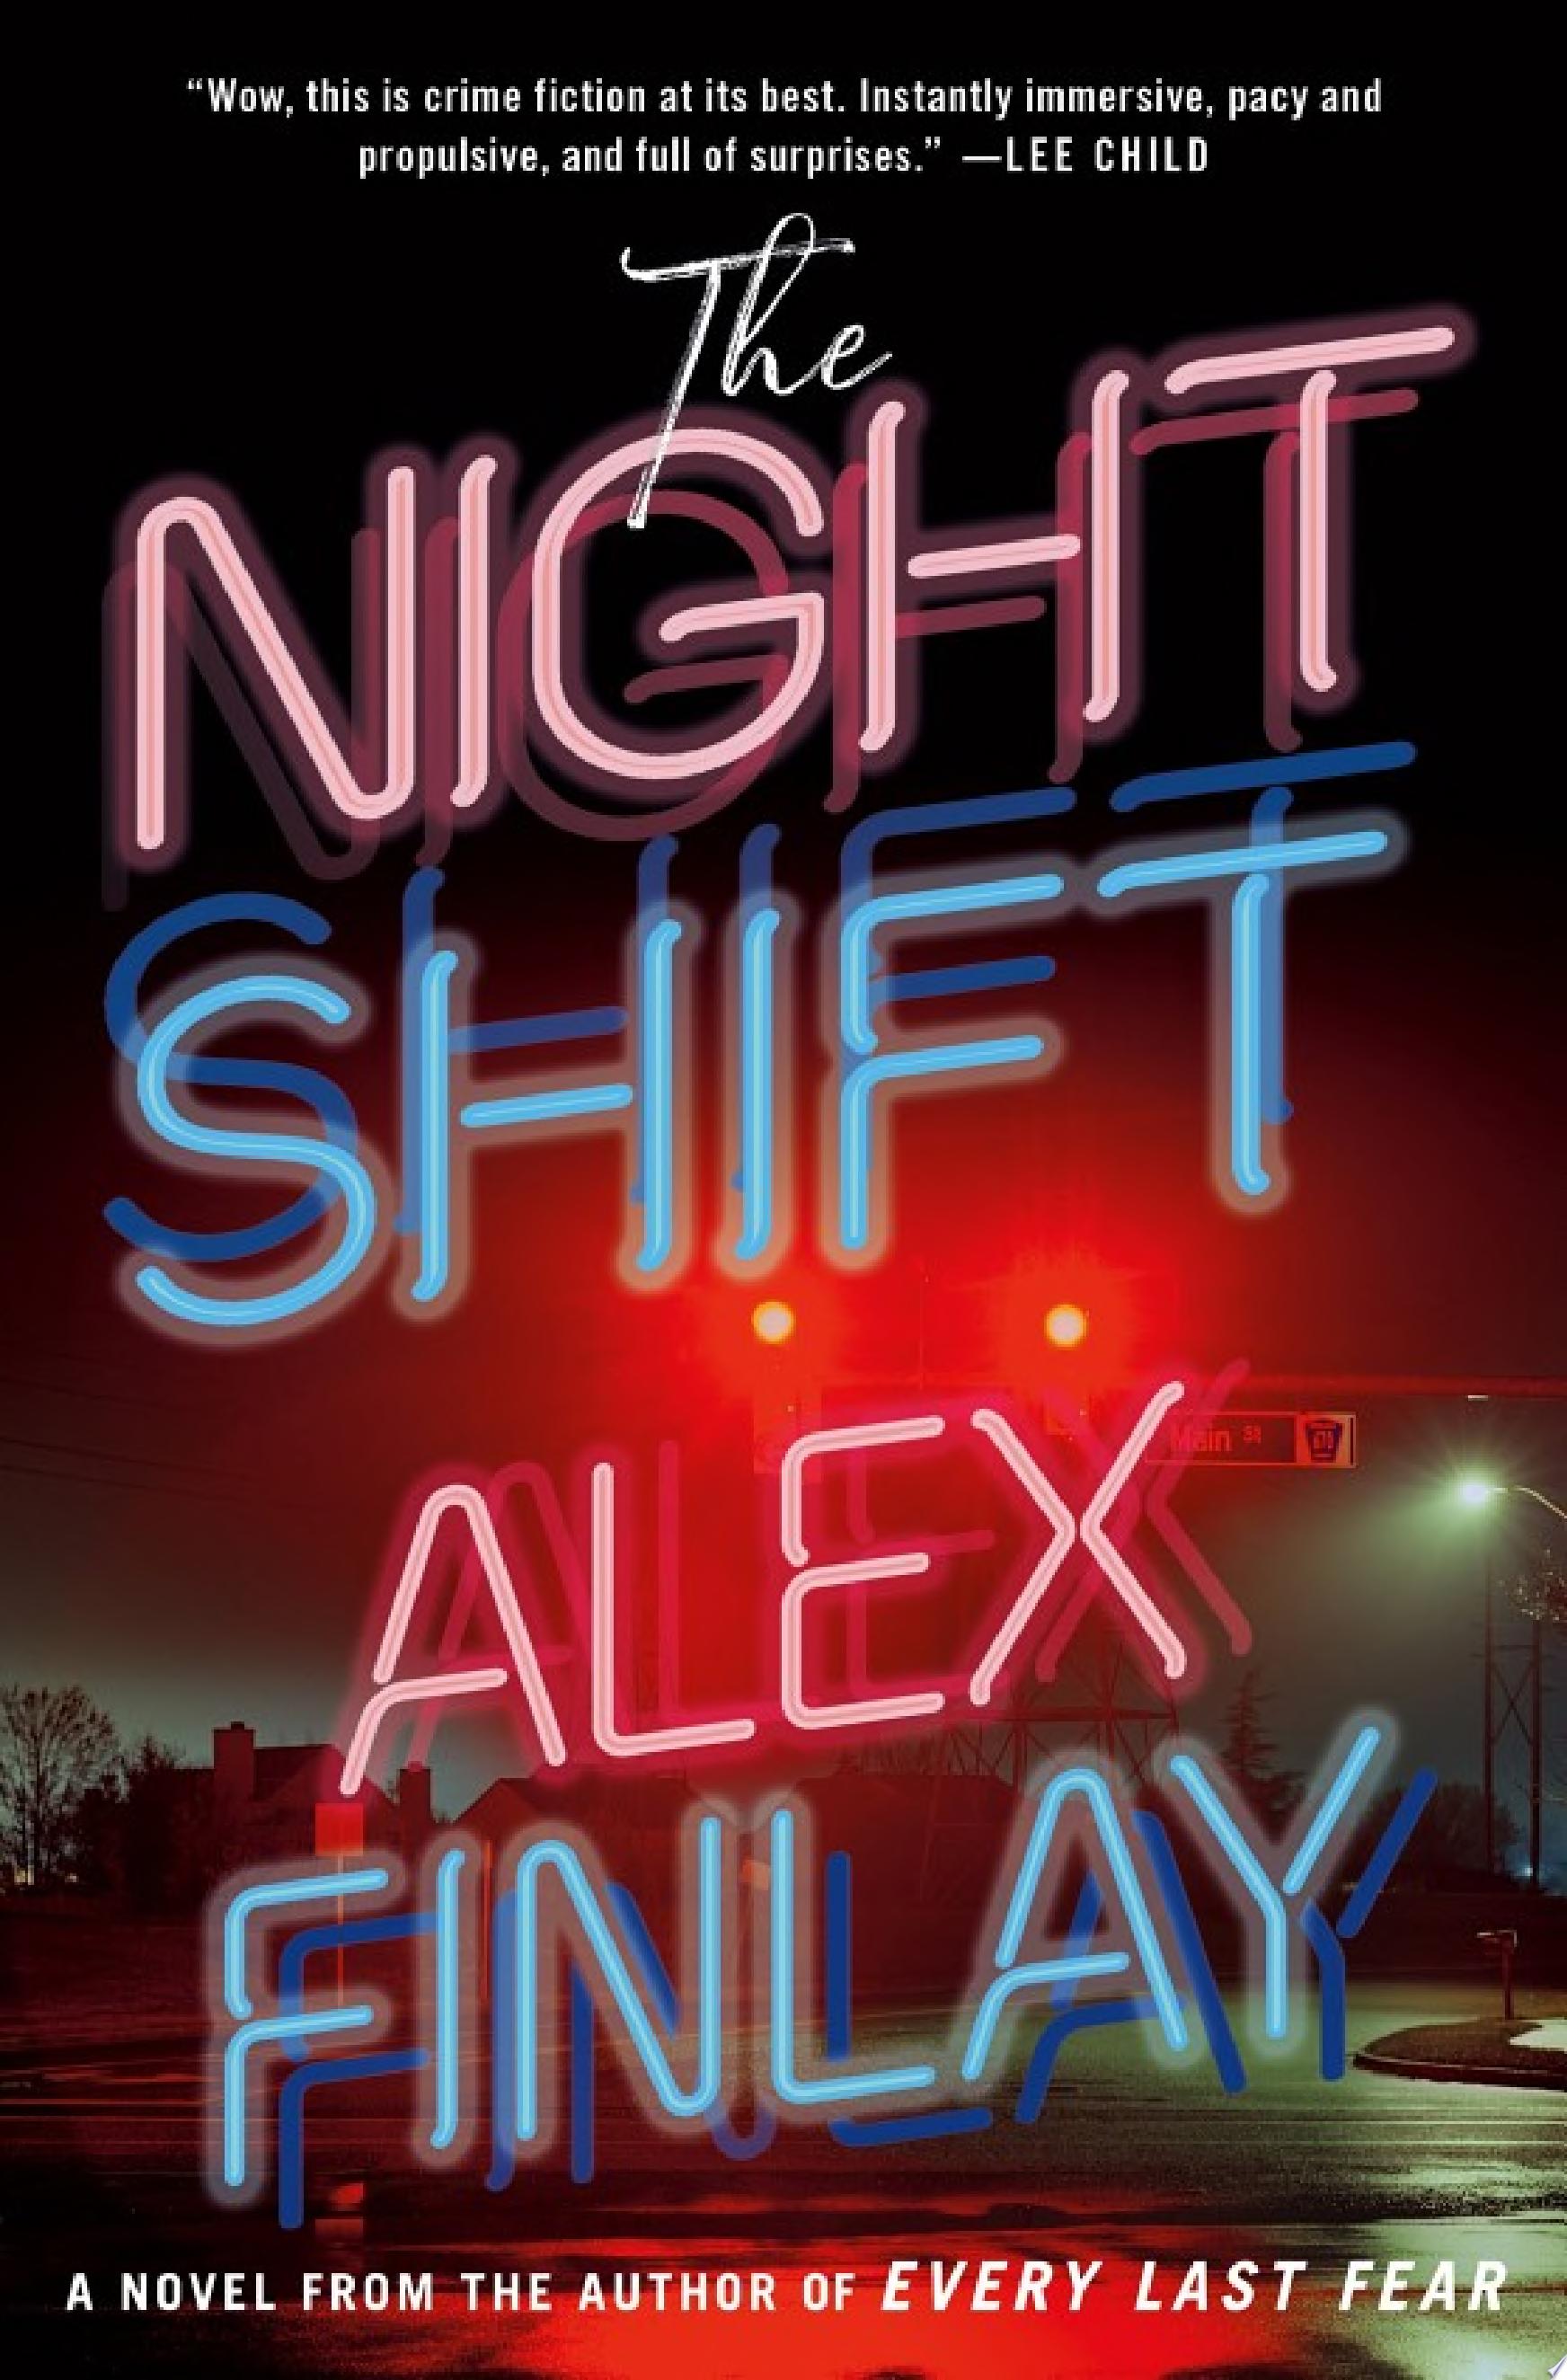 Image for "The Night Shift"